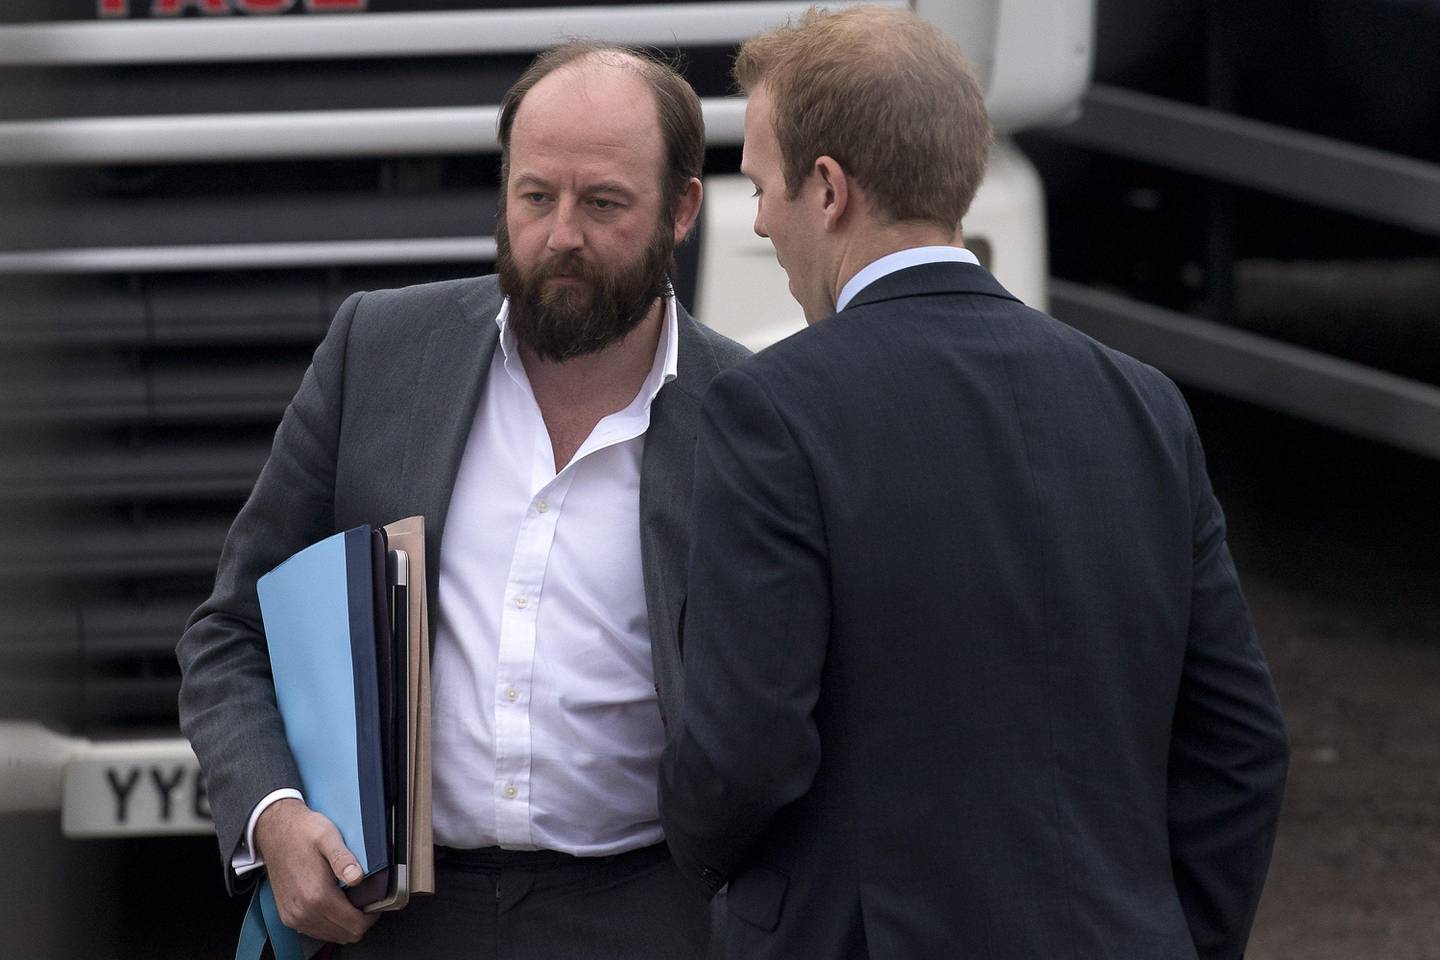 (FILES) This file photo taken on May 12, 2017 shows Joint Downing Street Chief of Staff, Nick Timothy (L), waiting at haulage and logistics company Davies Transport where British Prime Minister Theresa May is on a visit in north-east England.
One of British Prime Minister Theresa May's chief advisors announced his resignation Saturday, June 10, 2017, after a crushing electoral setback left her authority in tatters. Nick Timothy, one of two chiefs of staff on whom May relies heavily, said he took responsibility for the Conservative manifesto for Thursday's vote, in which the centre-right party lost its parliamentary majority.
 / AFP PHOTO / POOL / Justin TALLIS